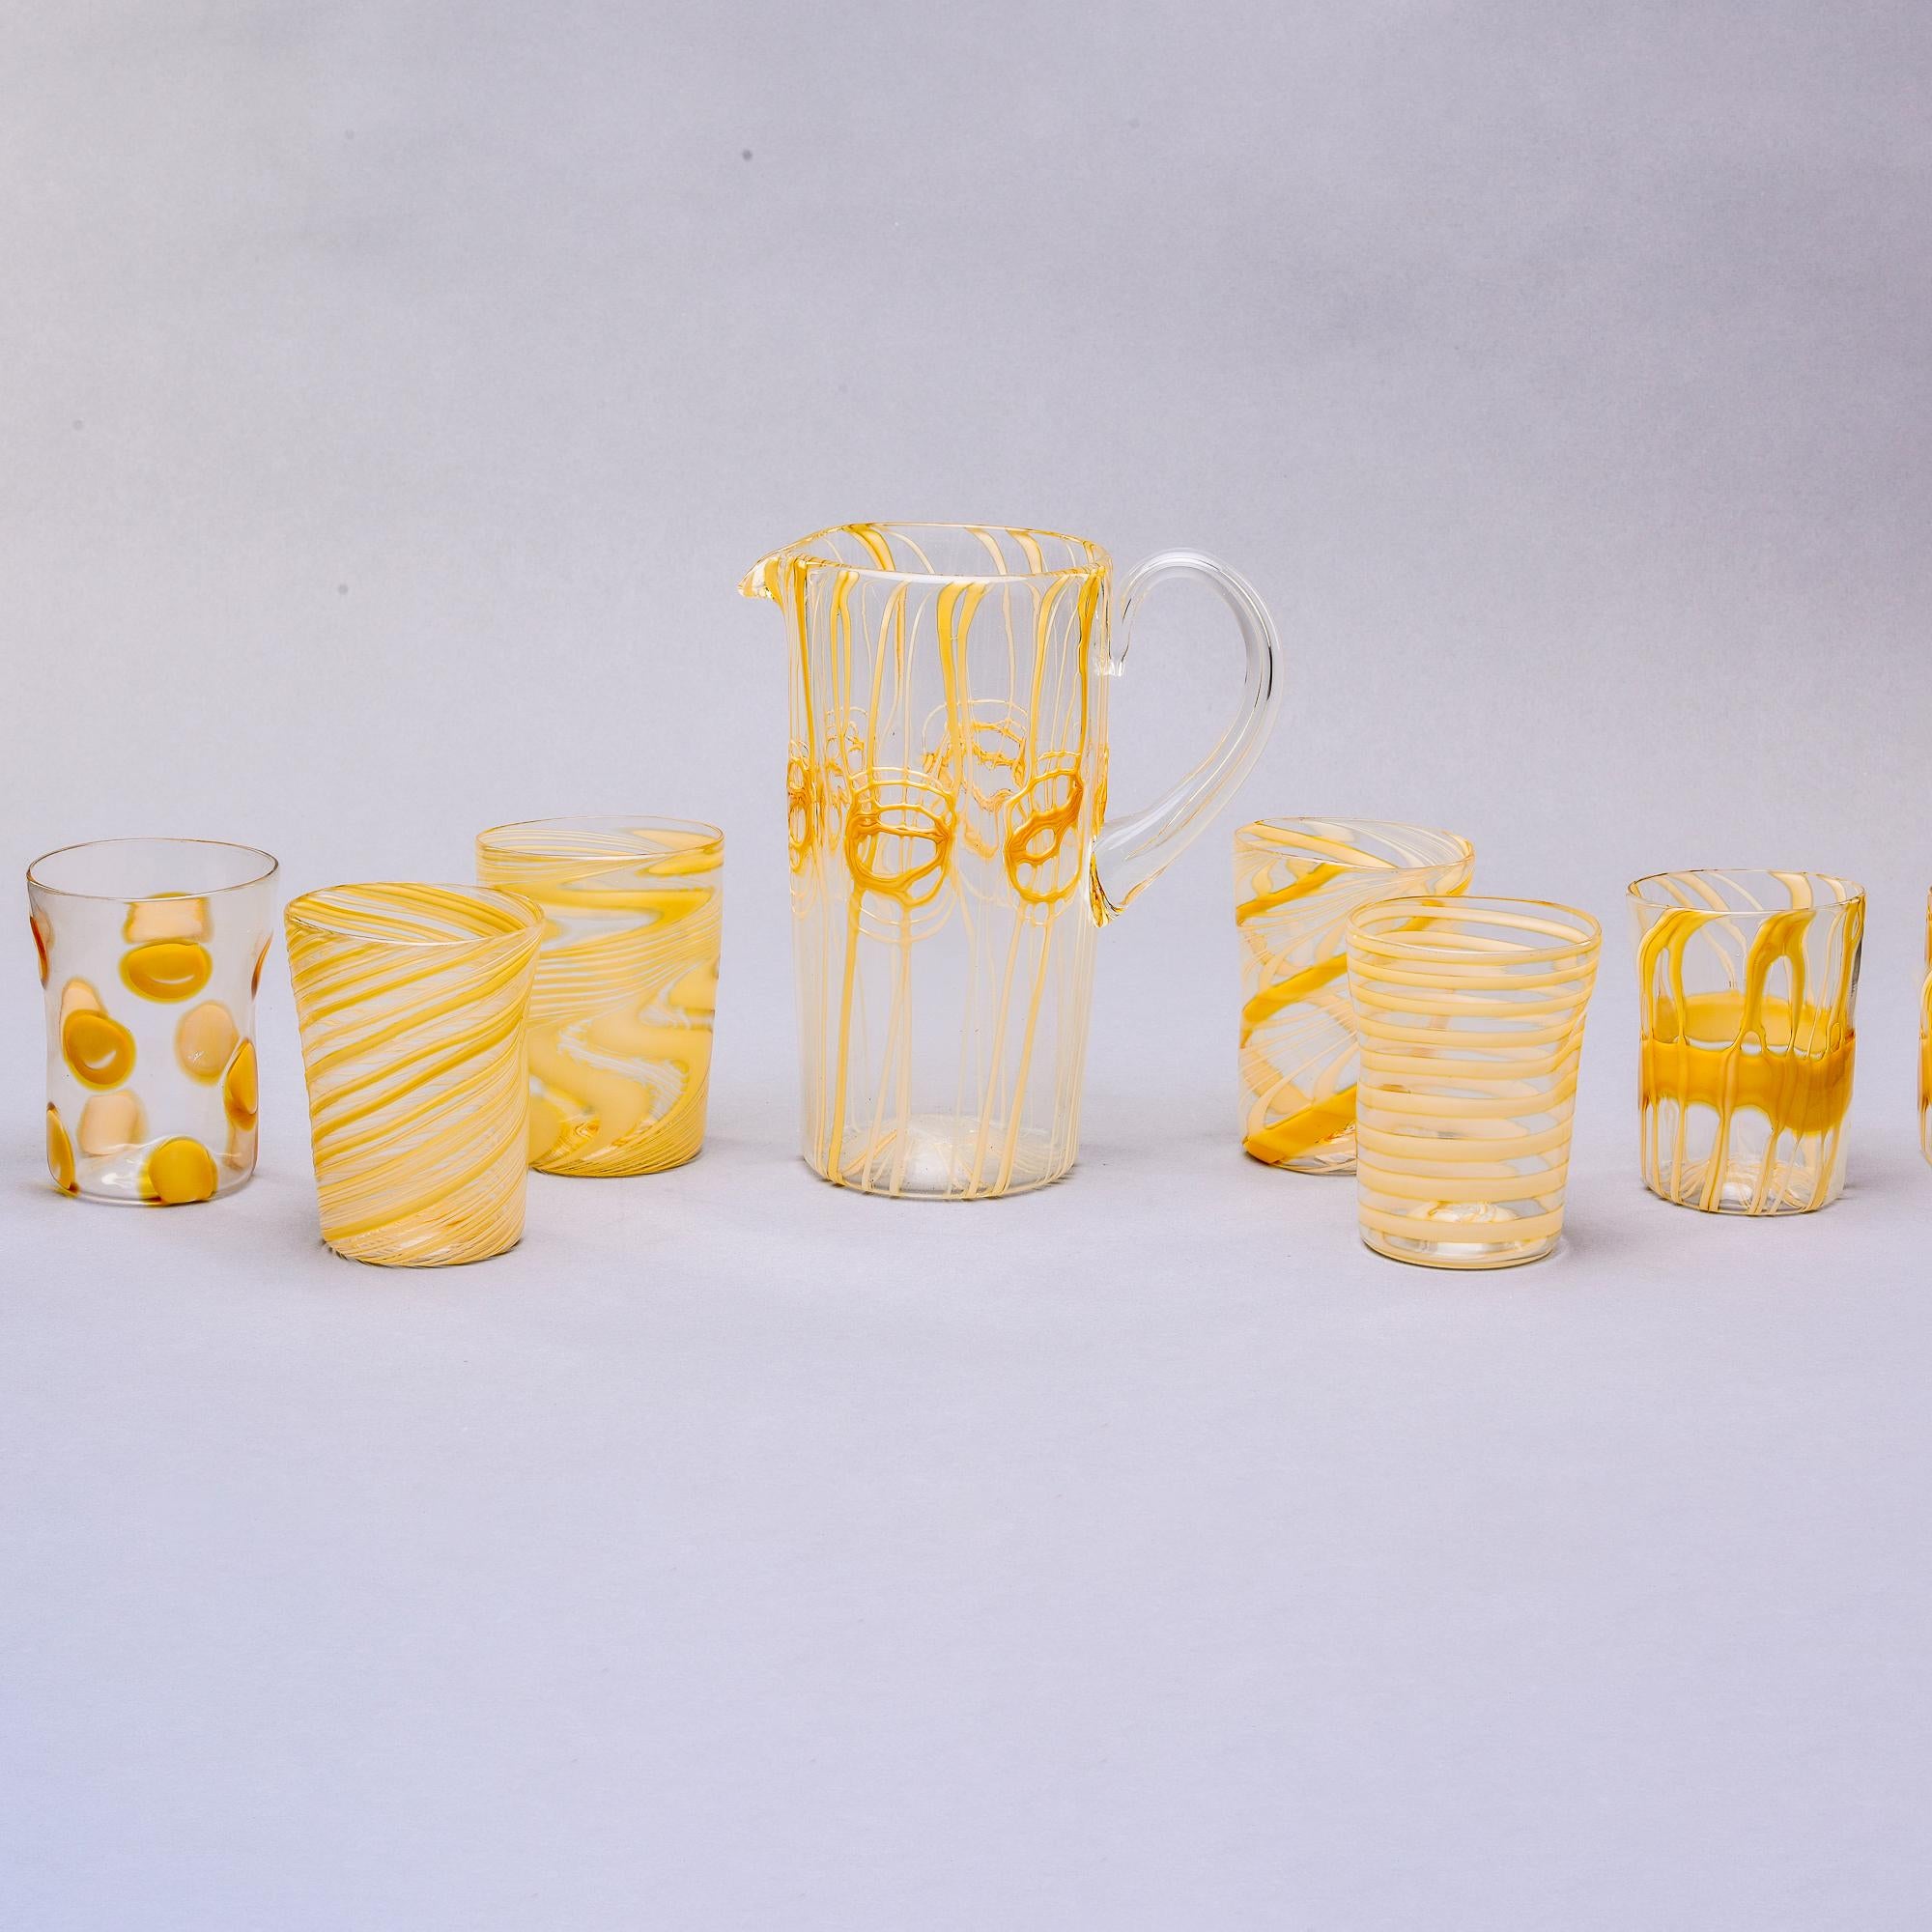 Found in Italy, this Murano glass pitcher comes with six coordinating tumblers. Pitcher is clear mouth blown glass with gold abstract decoration and tumblers has varying patterns in the same clear glass with gold decoration. Unknown Murano maker.